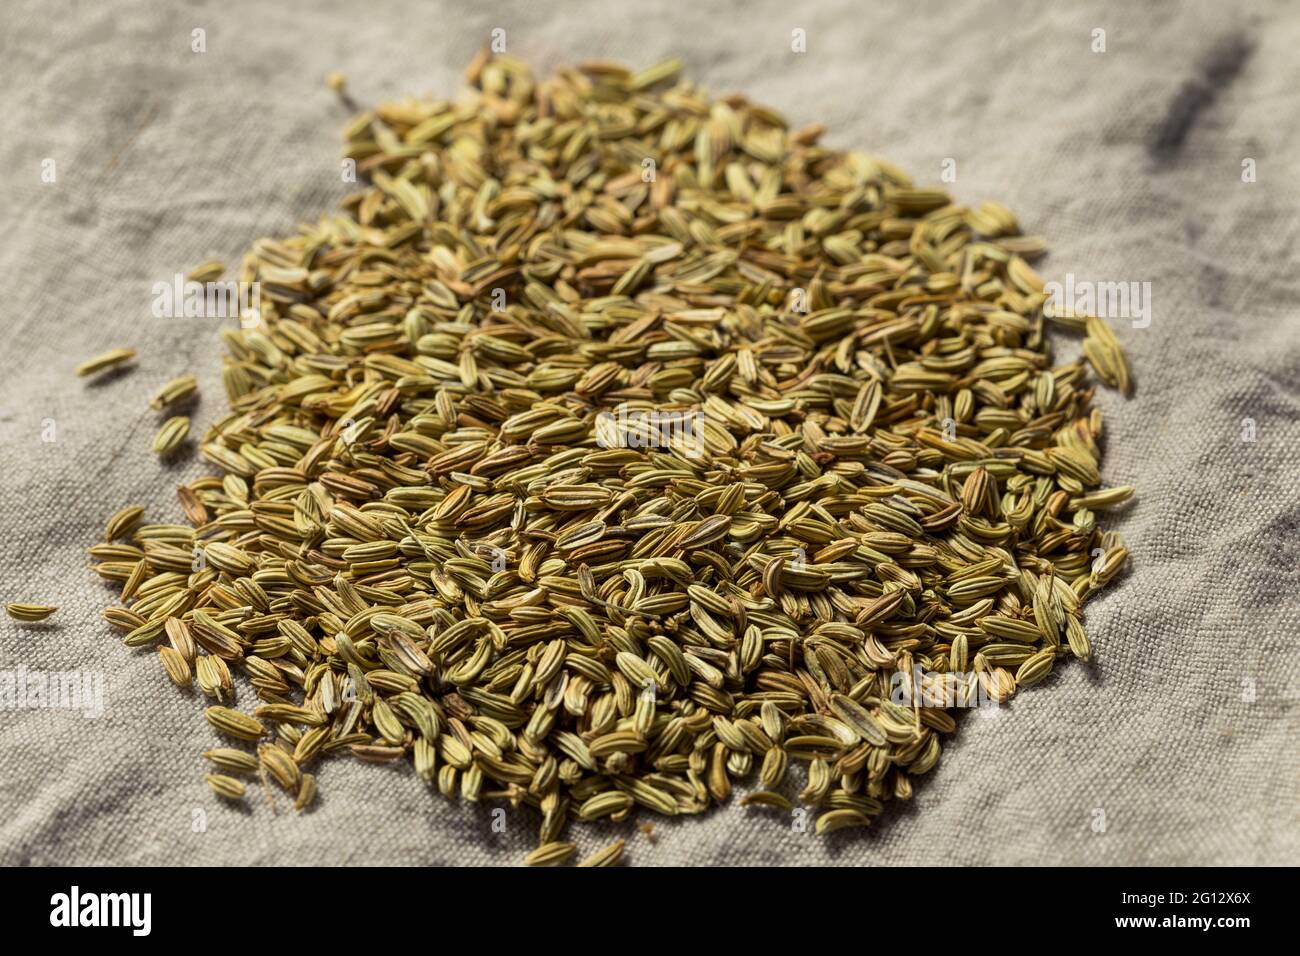 Homemade Raw Fennel Seeds in a Bowl Stock Photo